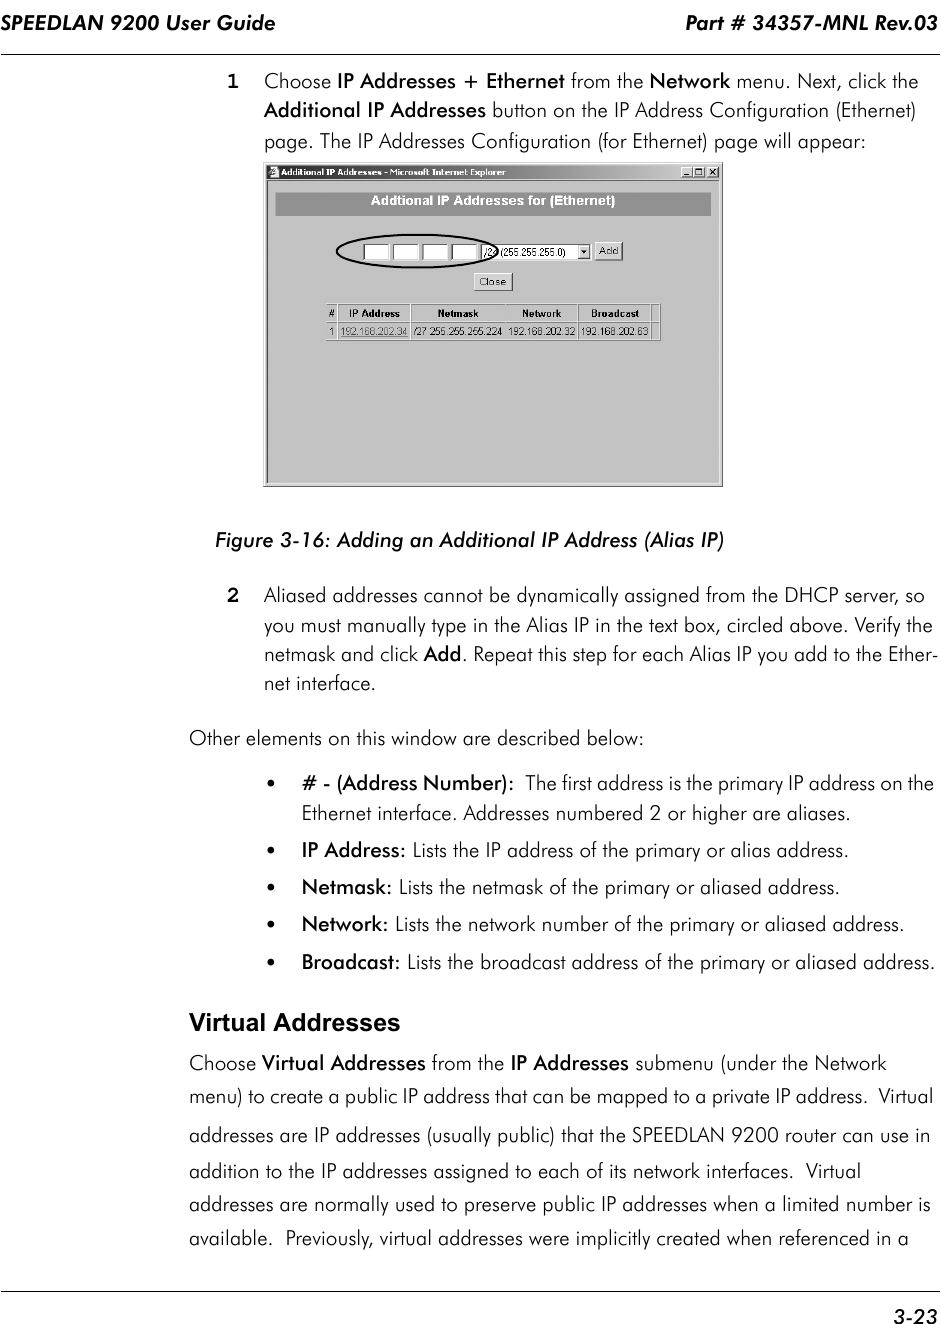 SPEEDLAN 9200 User Guide                                                                    Part # 34357-MNL Rev.03      3-23                                                                                                                                                              1Choose IP Addresses + Ethernet from the Network menu. Next, click the Additional IP Addresses button on the IP Address Configuration (Ethernet) page. The IP Addresses Configuration (for Ethernet) page will appear:Figure 3-16: Adding an Additional IP Address (Alias IP)2Aliased addresses cannot be dynamically assigned from the DHCP server, so you must manually type in the Alias IP in the text box, circled above. Verify the netmask and click Add. Repeat this step for each Alias IP you add to the Ether-net interface. Other elements on this window are described below:•# - (Address Number):  The first address is the primary IP address on the Ethernet interface. Addresses numbered 2 or higher are aliases. •IP Address: Lists the IP address of the primary or alias address.•Netmask: Lists the netmask of the primary or aliased address.•Network: Lists the network number of the primary or aliased address.•Broadcast: Lists the broadcast address of the primary or aliased address.Virtual AddressesChoose Virtual Addresses from the IP Addresses submenu (under the Network menu) to create a public IP address that can be mapped to a private IP address.  Virtual addresses are IP addresses (usually public) that the SPEEDLAN 9200 router can use in addition to the IP addresses assigned to each of its network interfaces.  Virtual addresses are normally used to preserve public IP addresses when a limited number is available.  Previously, virtual addresses were implicitly created when referenced in a 